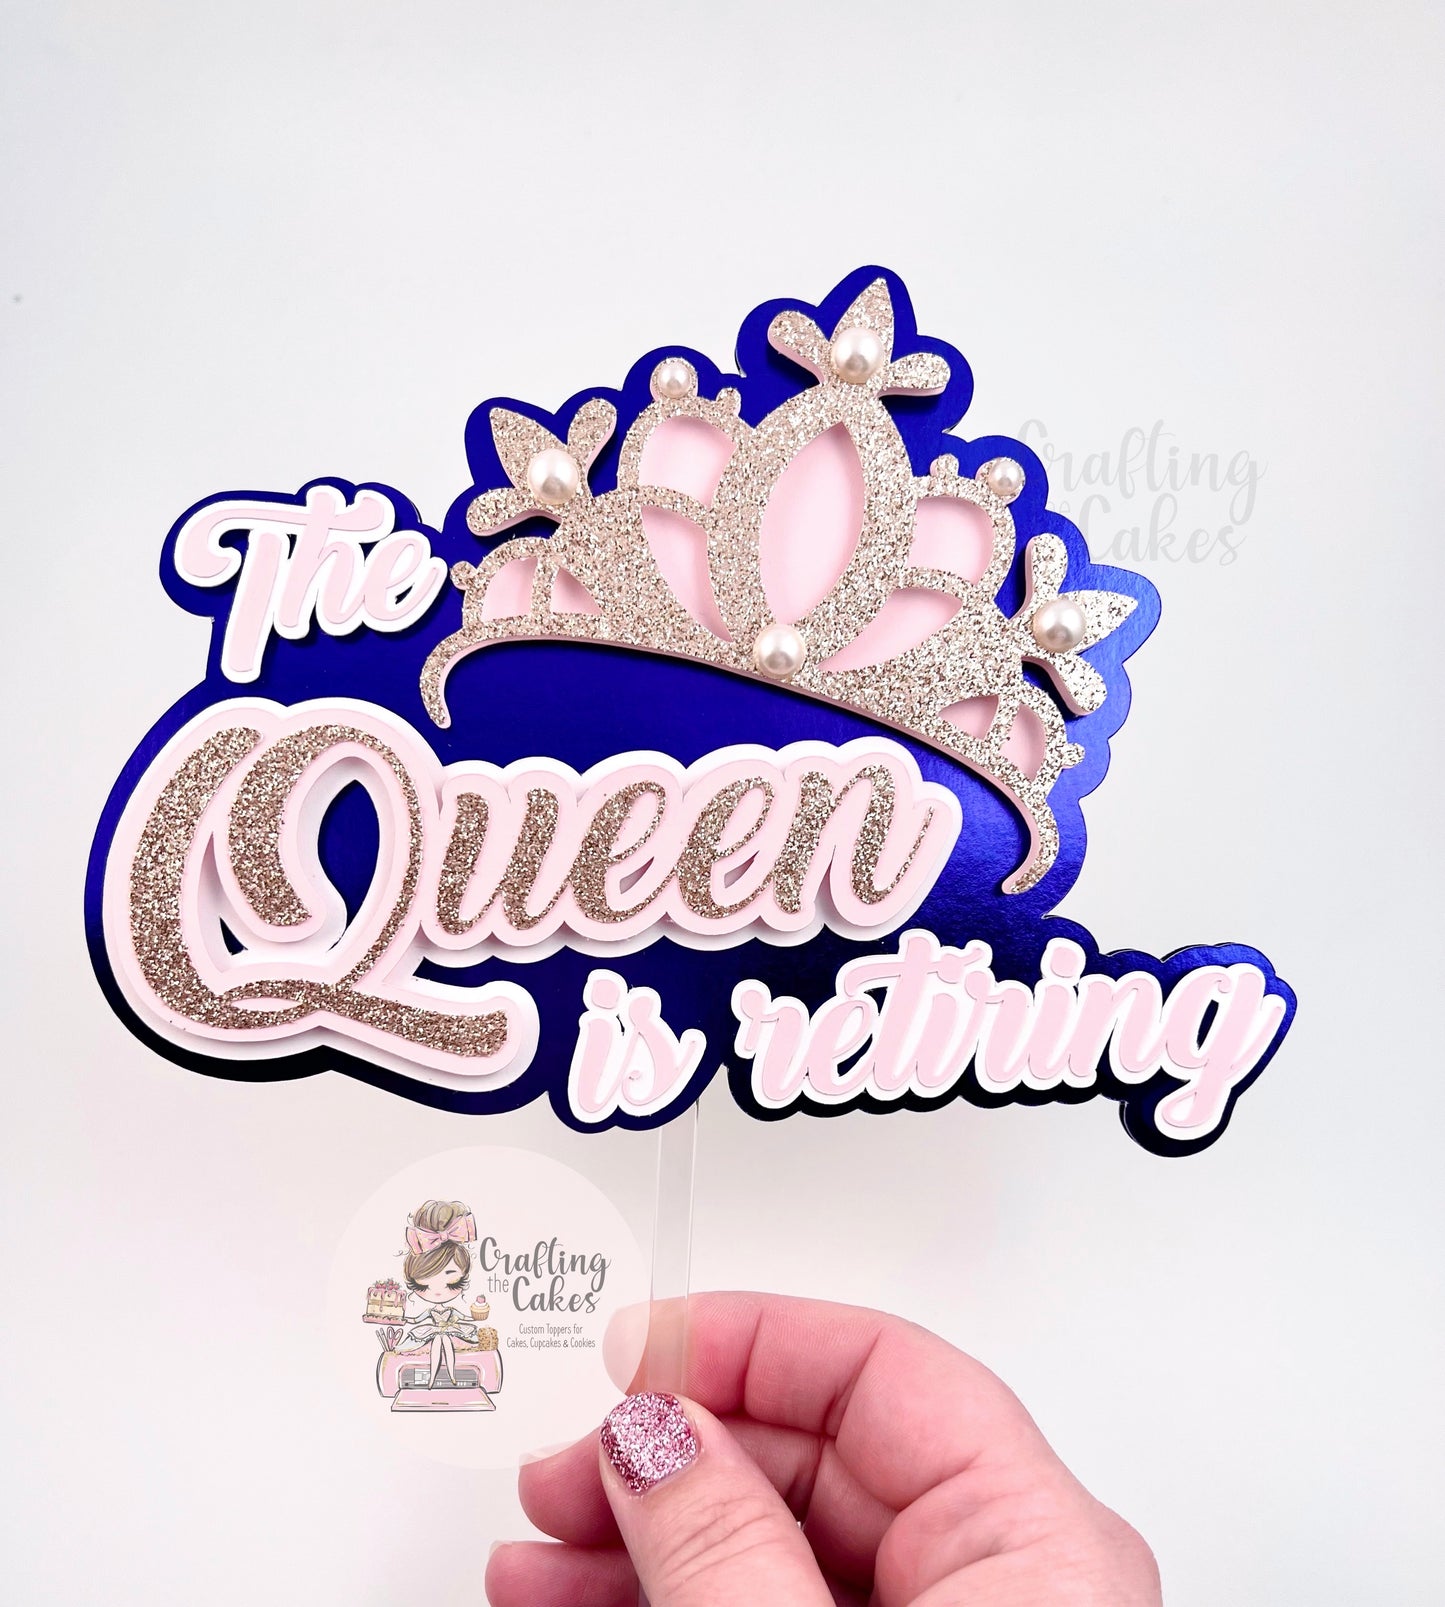 The Queen is Retiring Cake Topper